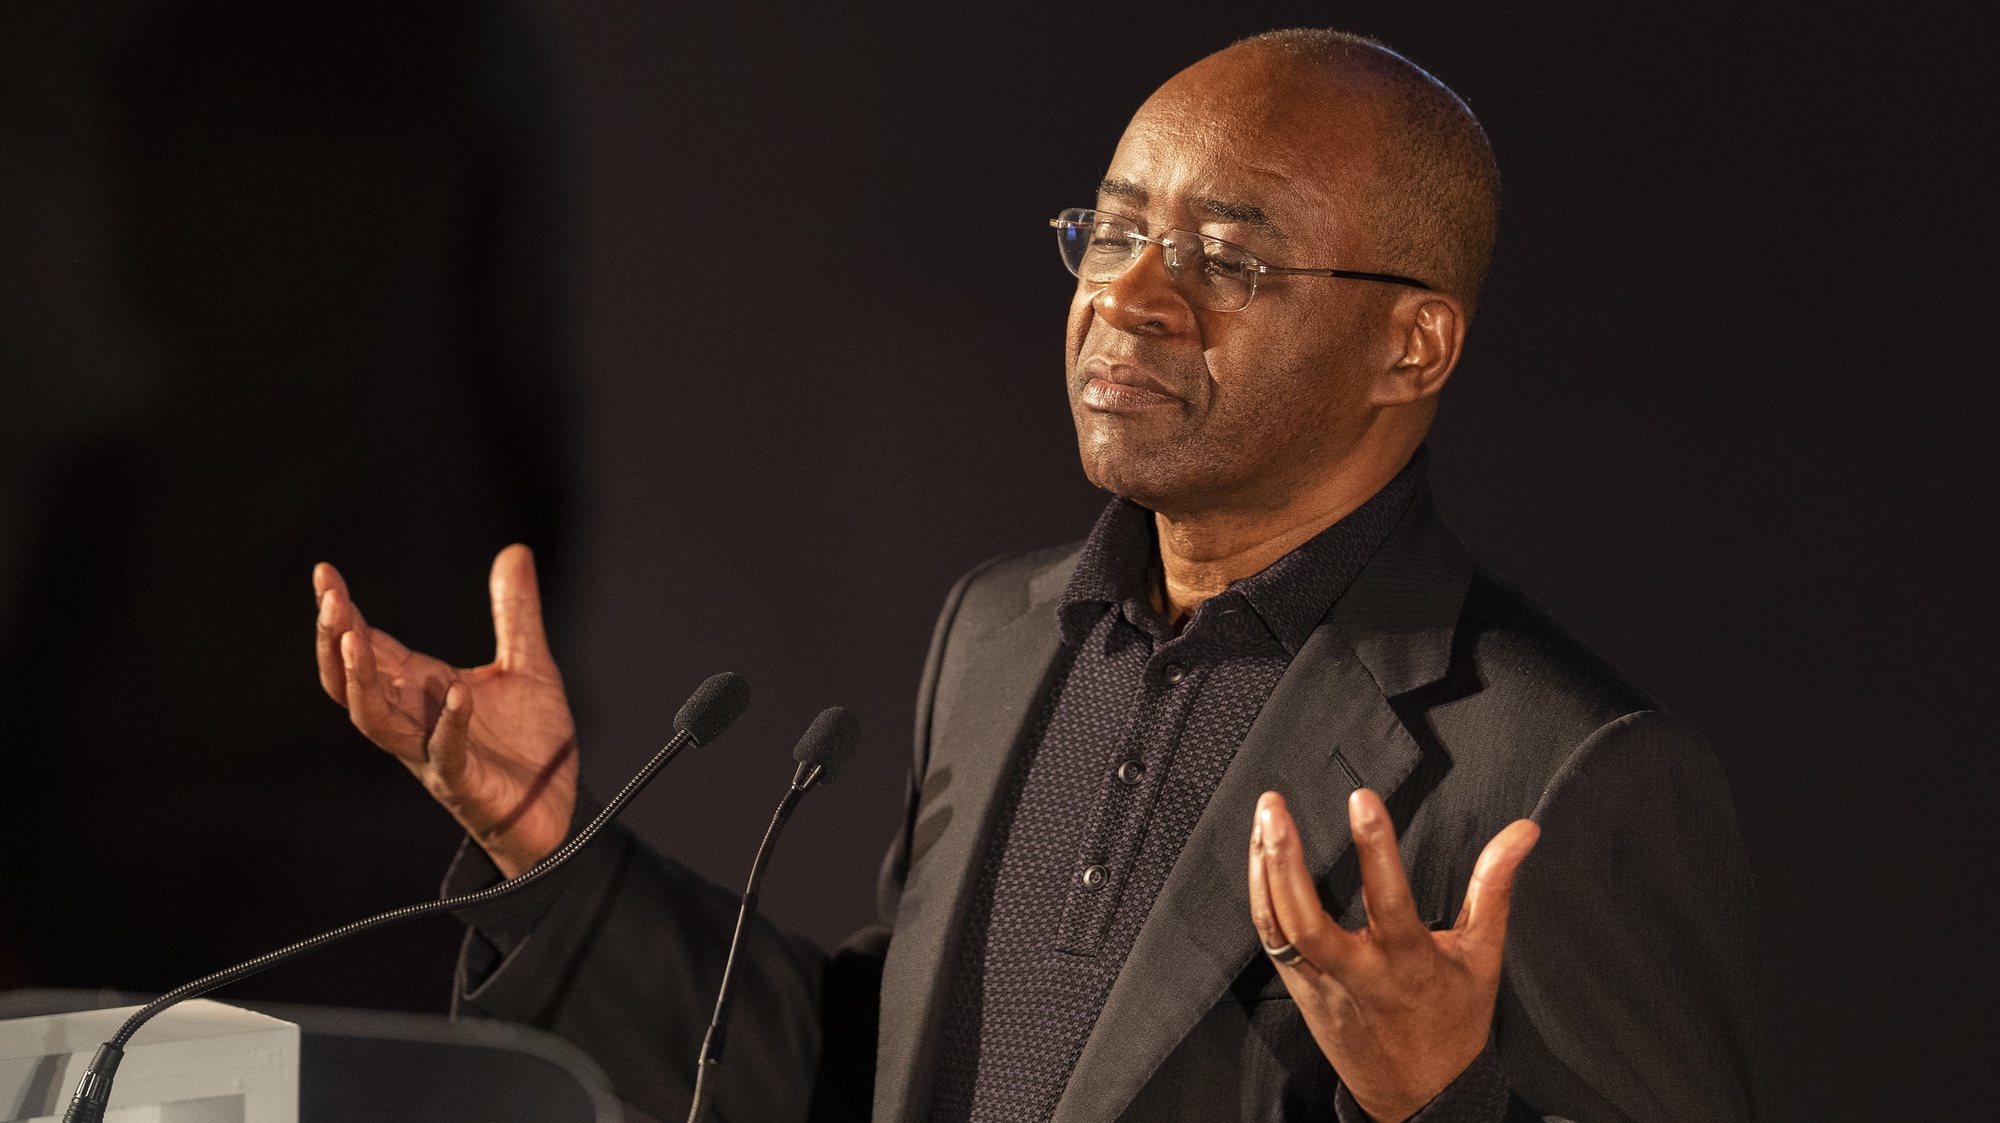 epa07904301 Tech billionaire Strive Masiyiwa speaks during the 9th Annual Desmond Tutu International Peace Lecture at the Cape Town City Hall, South Africa 07 October 2019. Archbishop Emeritus Desmond Tutu celebrates his 88th birthday on 07 October. The lecture by Zimbabwean-born businessman and philanthropist, Strive Masiyiwa, focused on one of the critical struggles of our time: Overcoming corruption and restoring citizen trust, locally and globally.  EPA/NIC BOTHMA